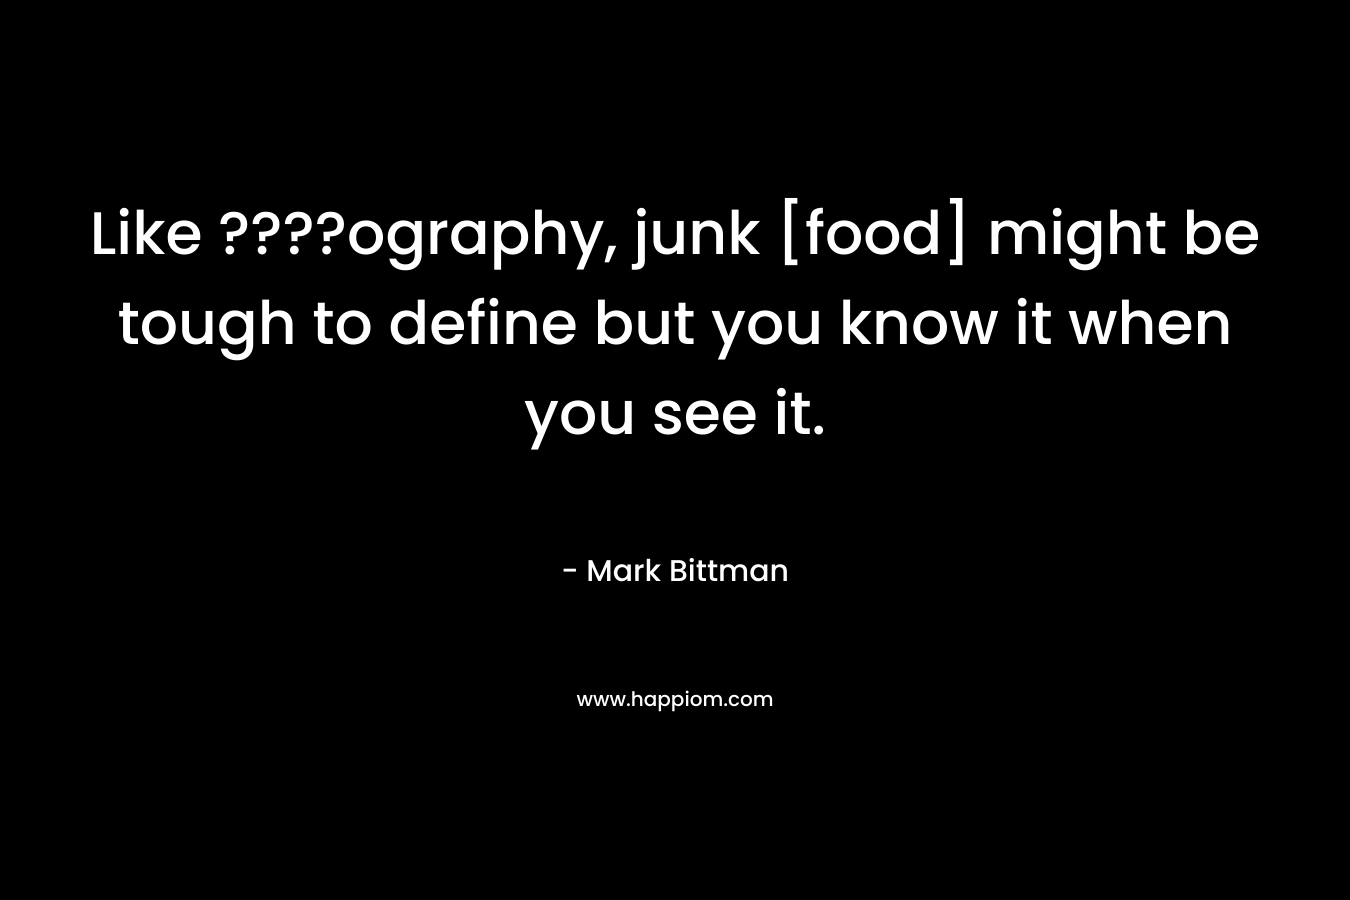 Like ????ography, junk [food] might be tough to define but you know it when you see it.